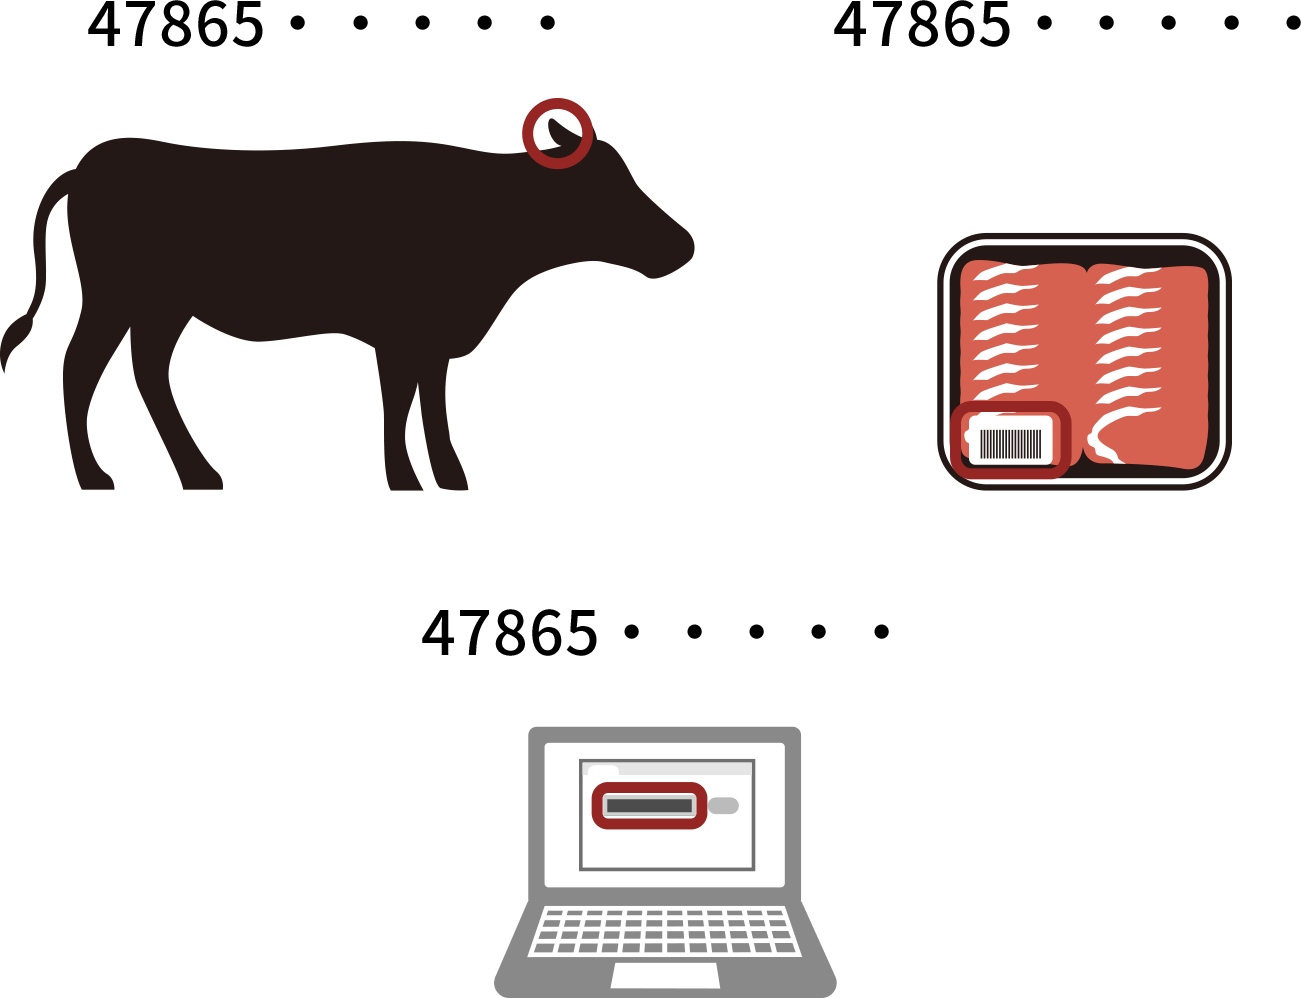 Beef produced in one of the world's most stringent quality control systems